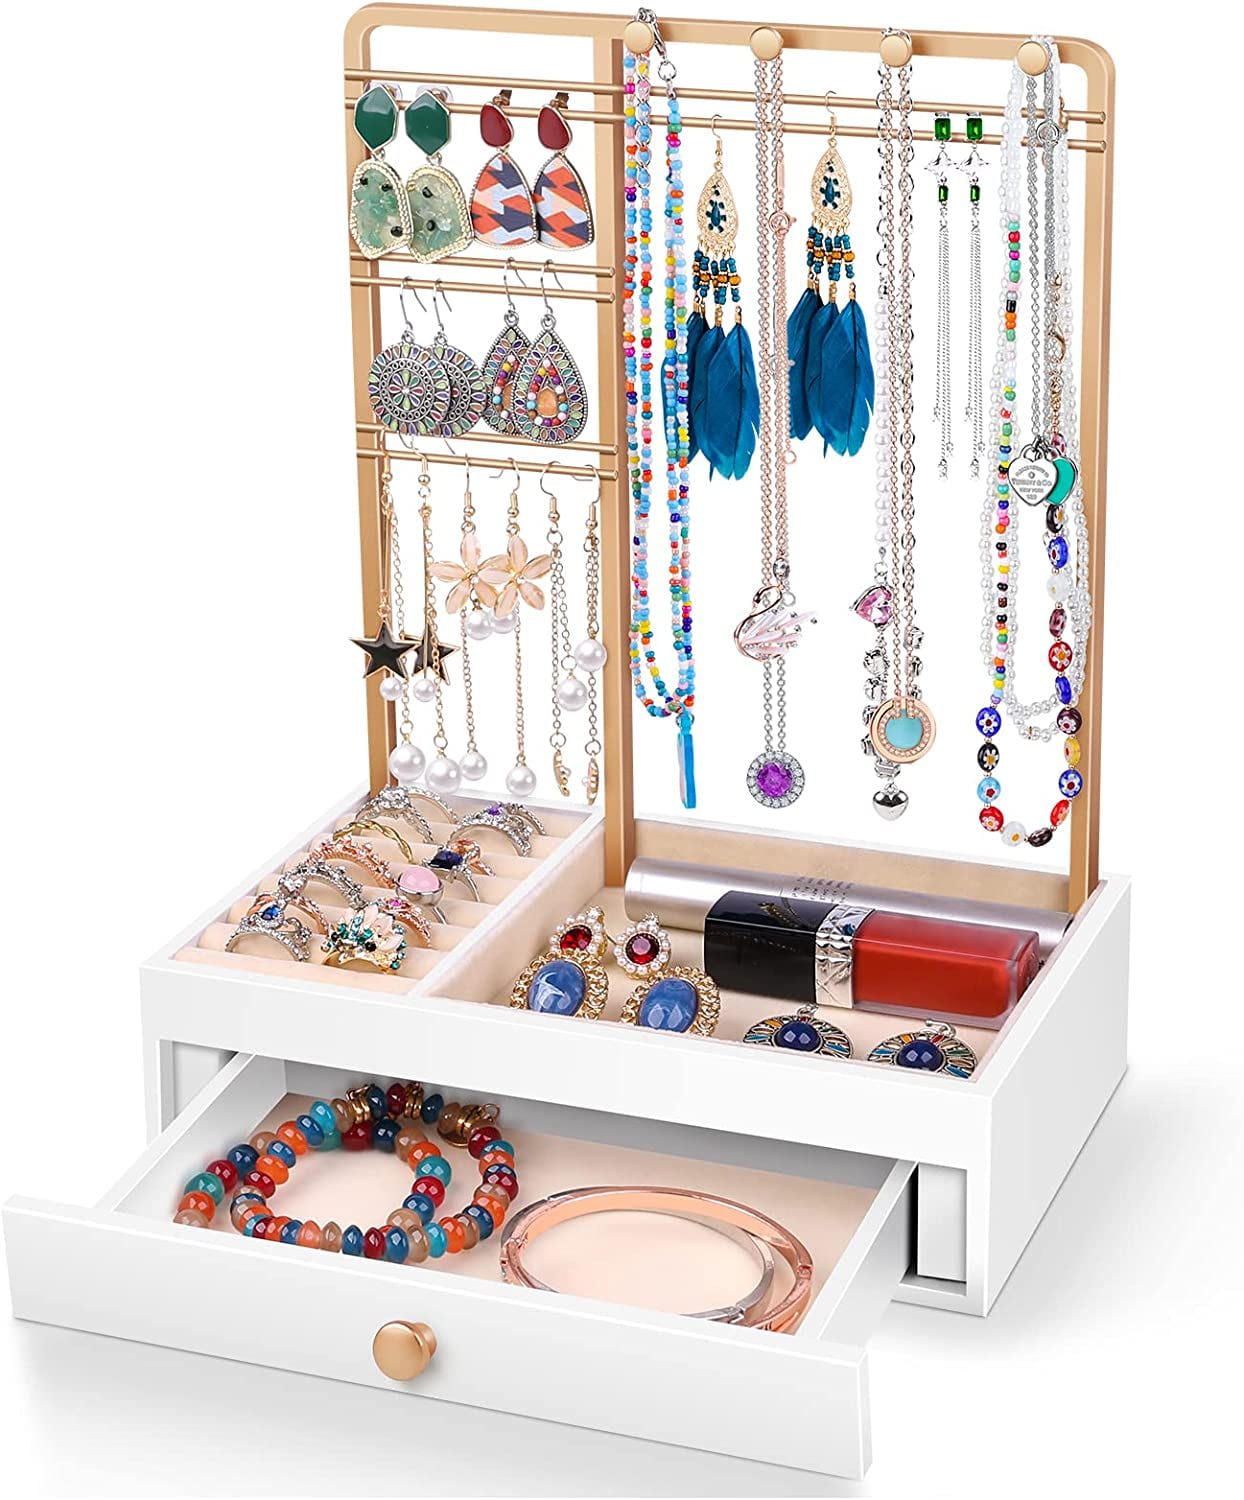 Sfugno Jewelry Box for Women, 5 Layer Large Wood Jewelry Boxes & Organizers  for Necklaces Earrings Rings Bracelets, Rustic Jewelry Organizer Box with  Drawers and Mirror 